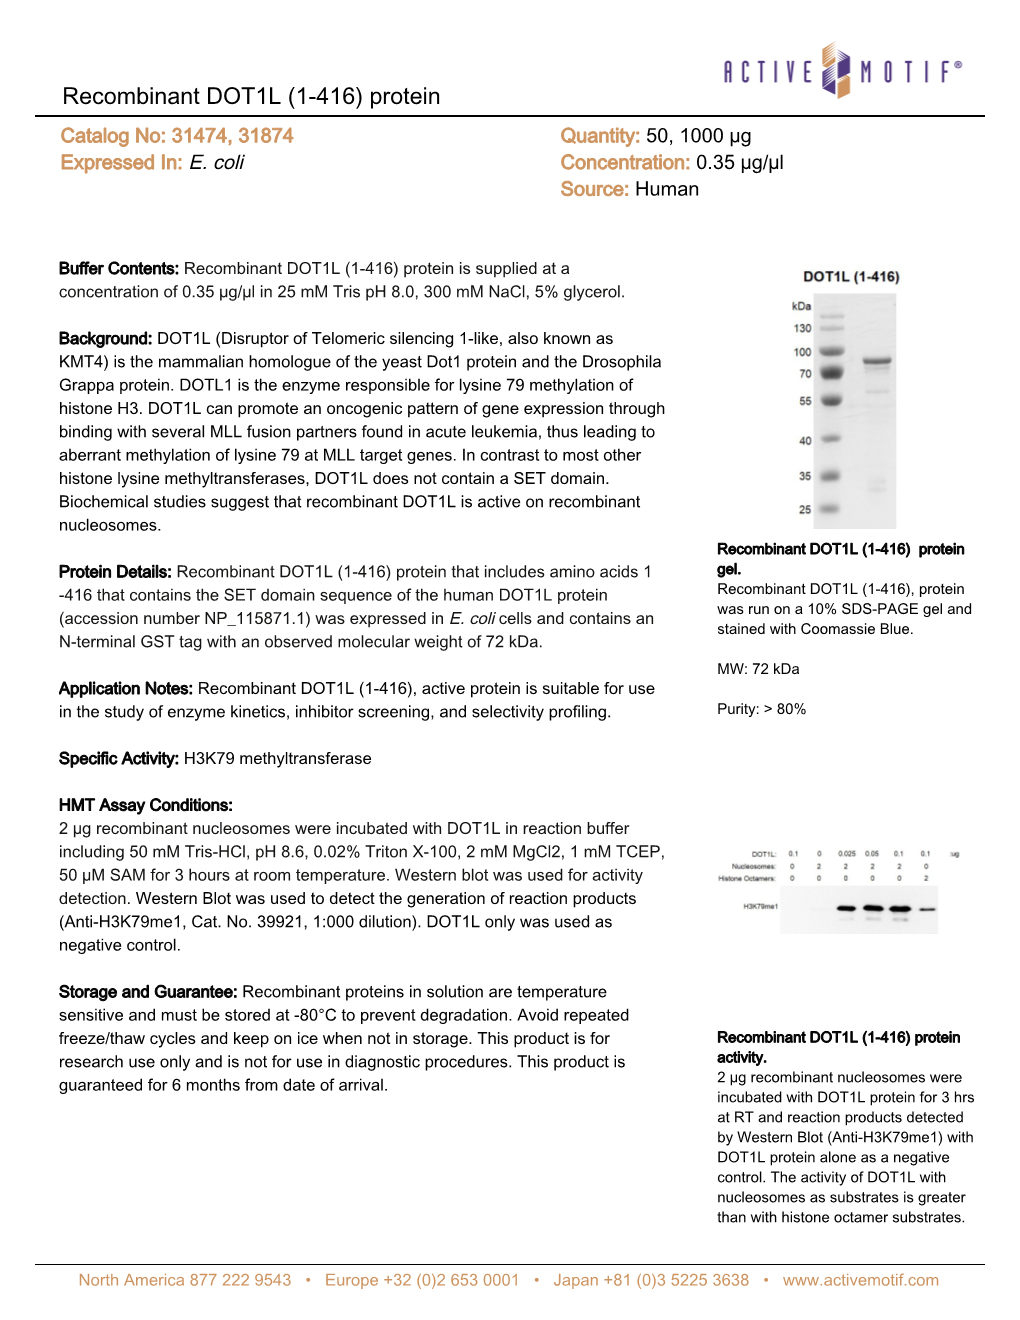 Recombinant DOT1L (1-416) Protein Catalog No: 31474, 31874 Quantity: 50, 1000 Μg Expressed In: E